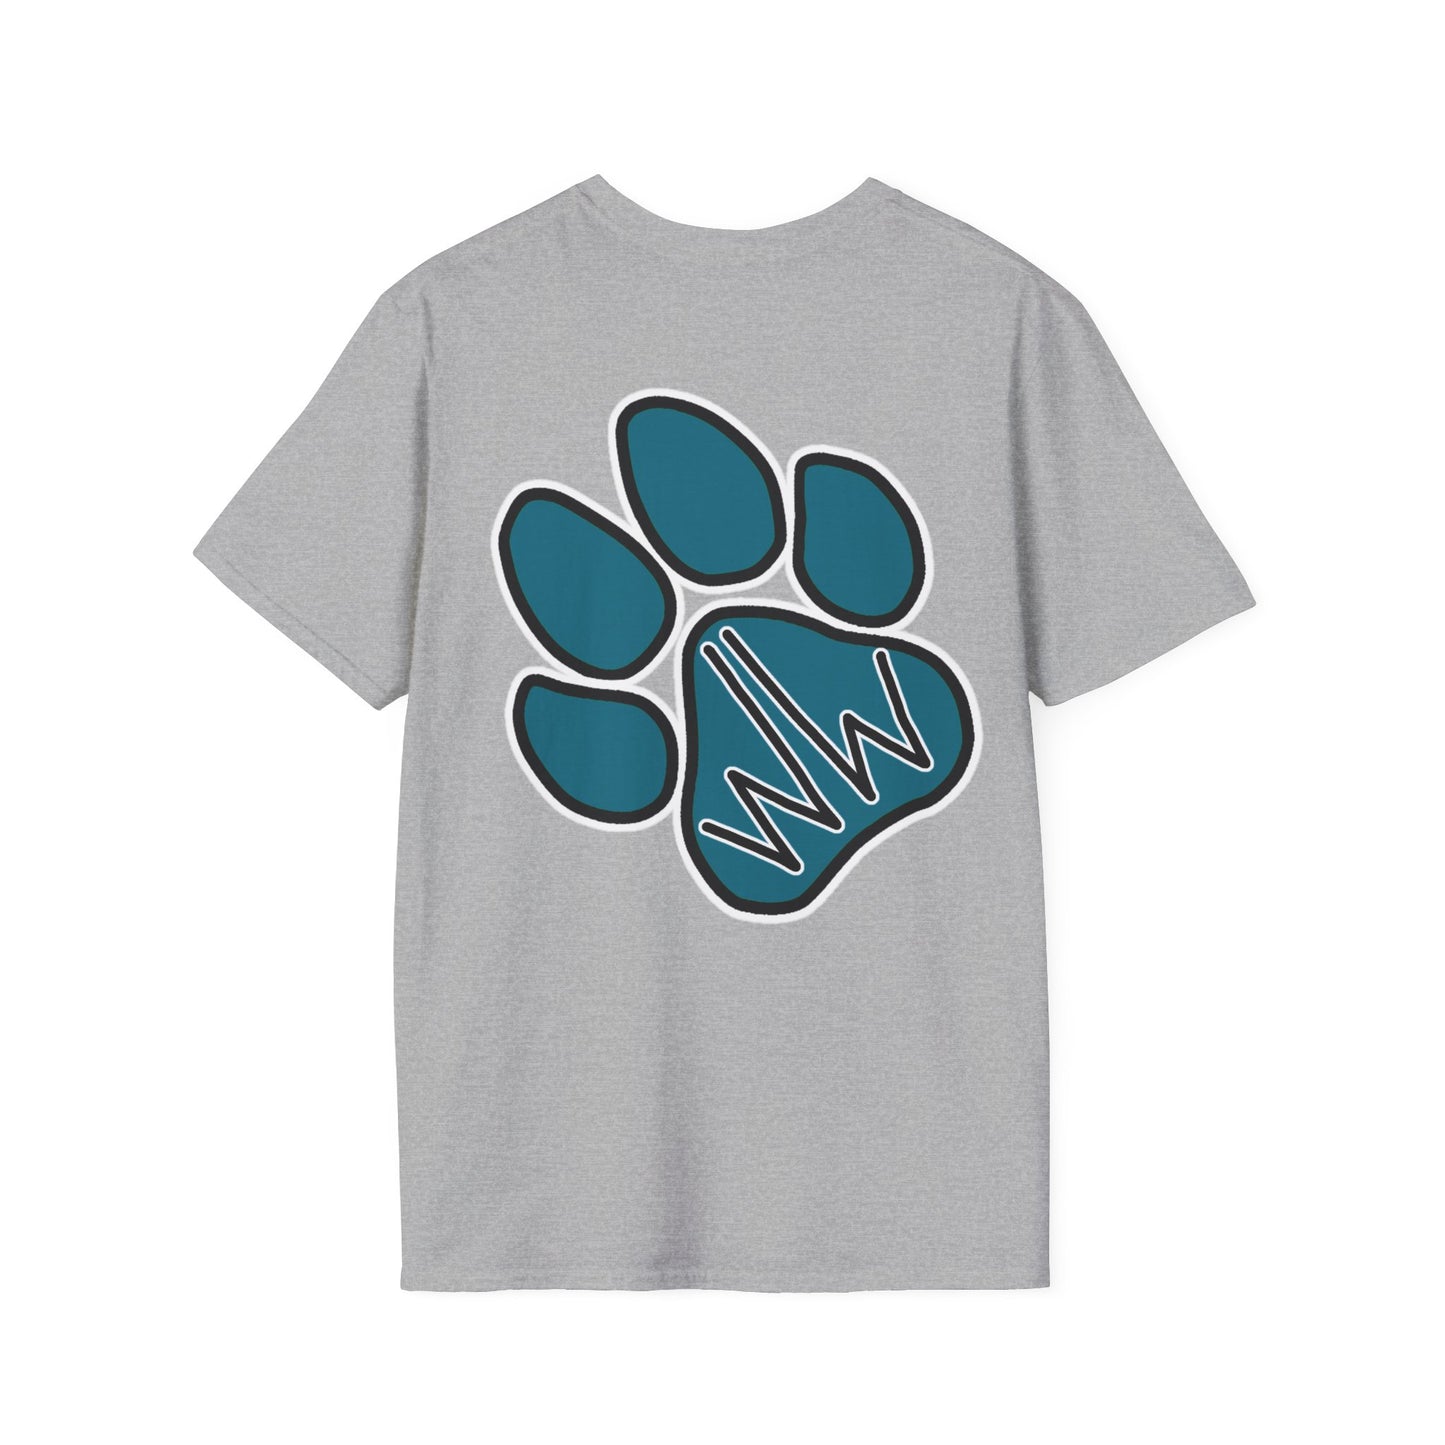 Re-Classic Dog Graphic Tee